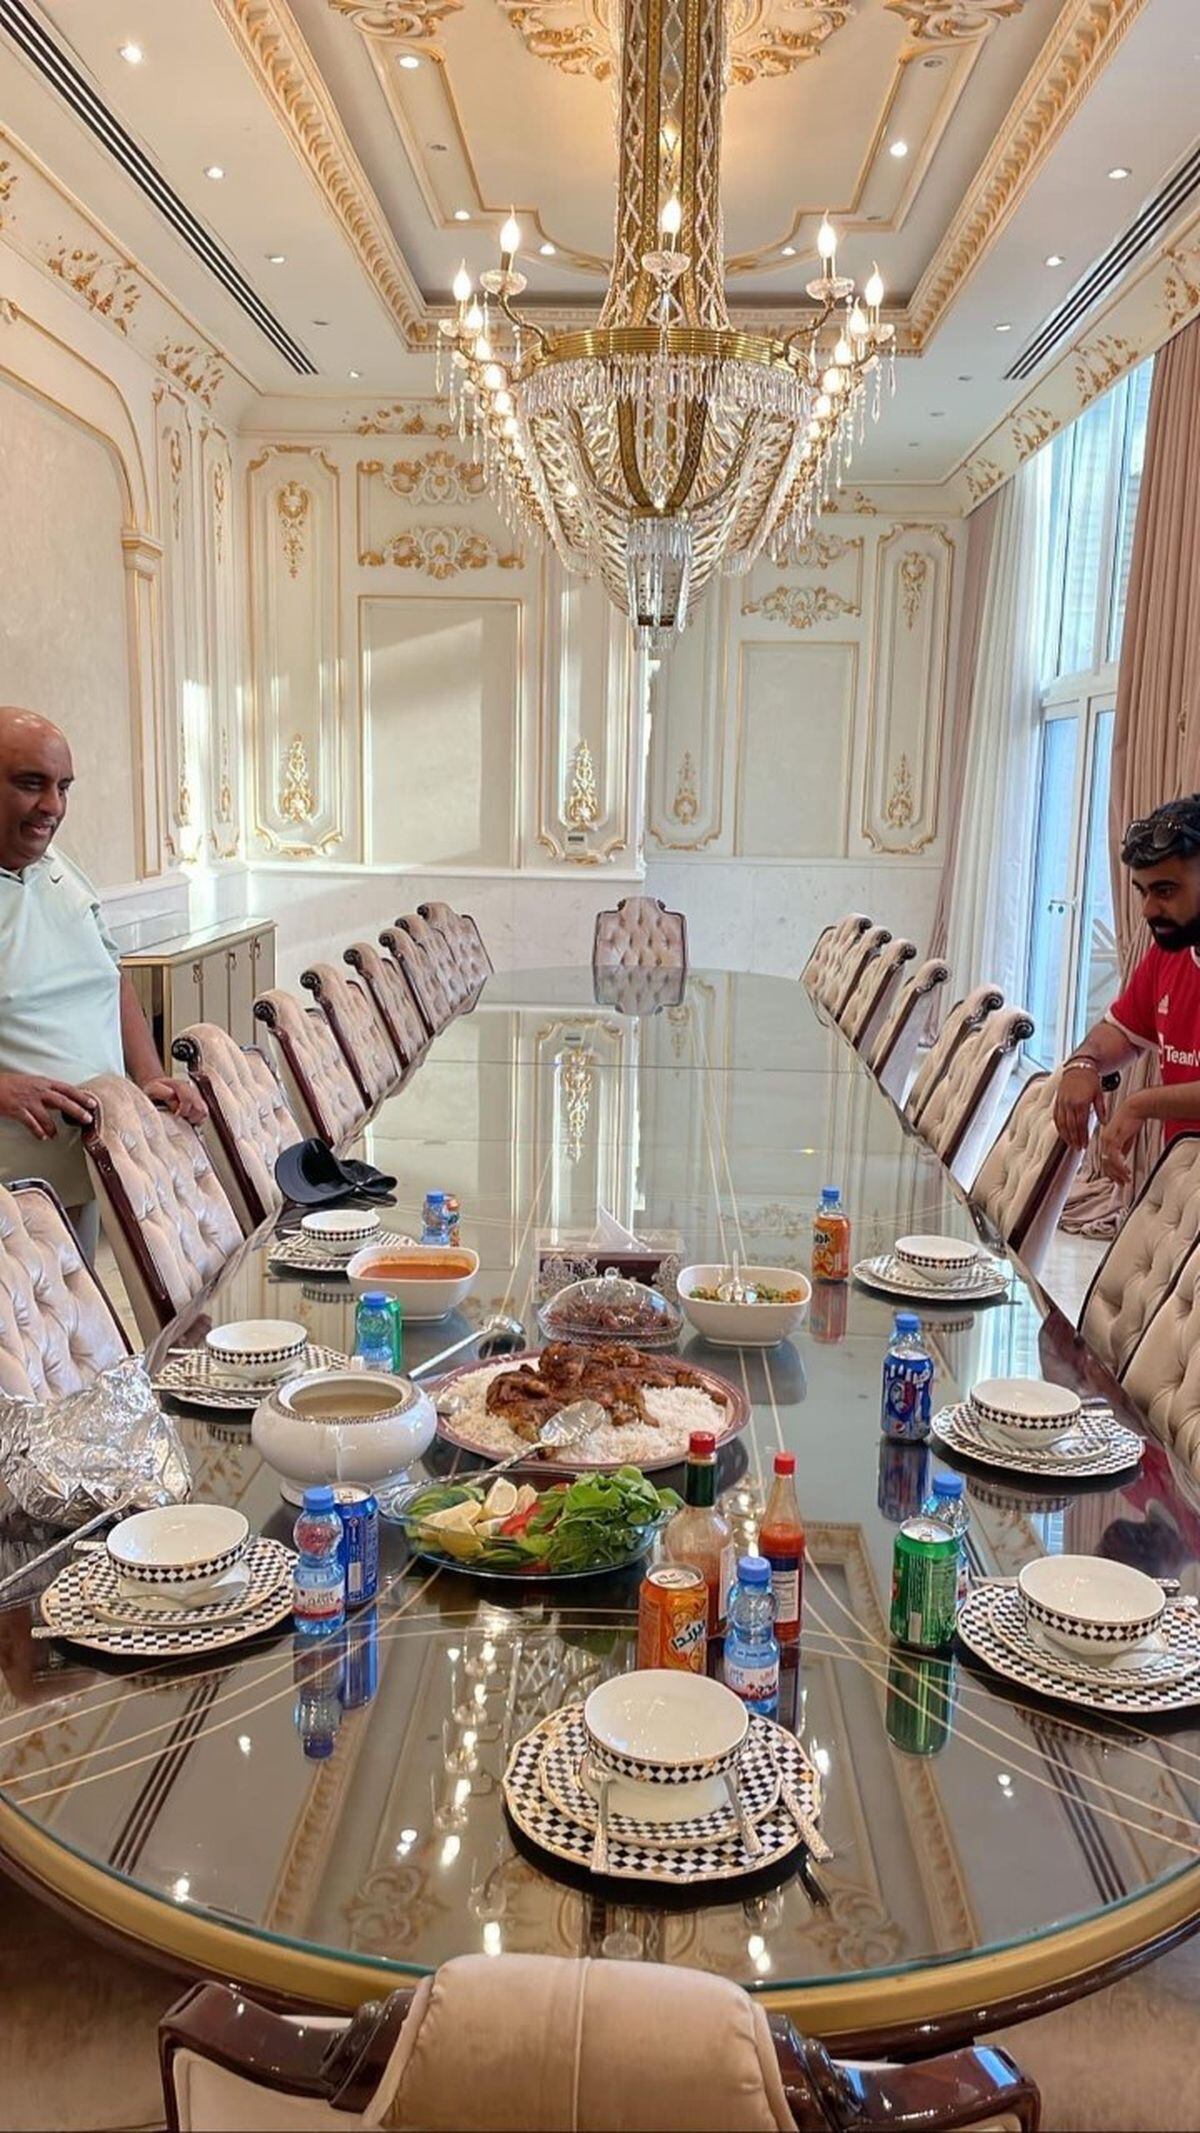 The Qatari millionaire invited the guys to his mansion to eat lunch with him